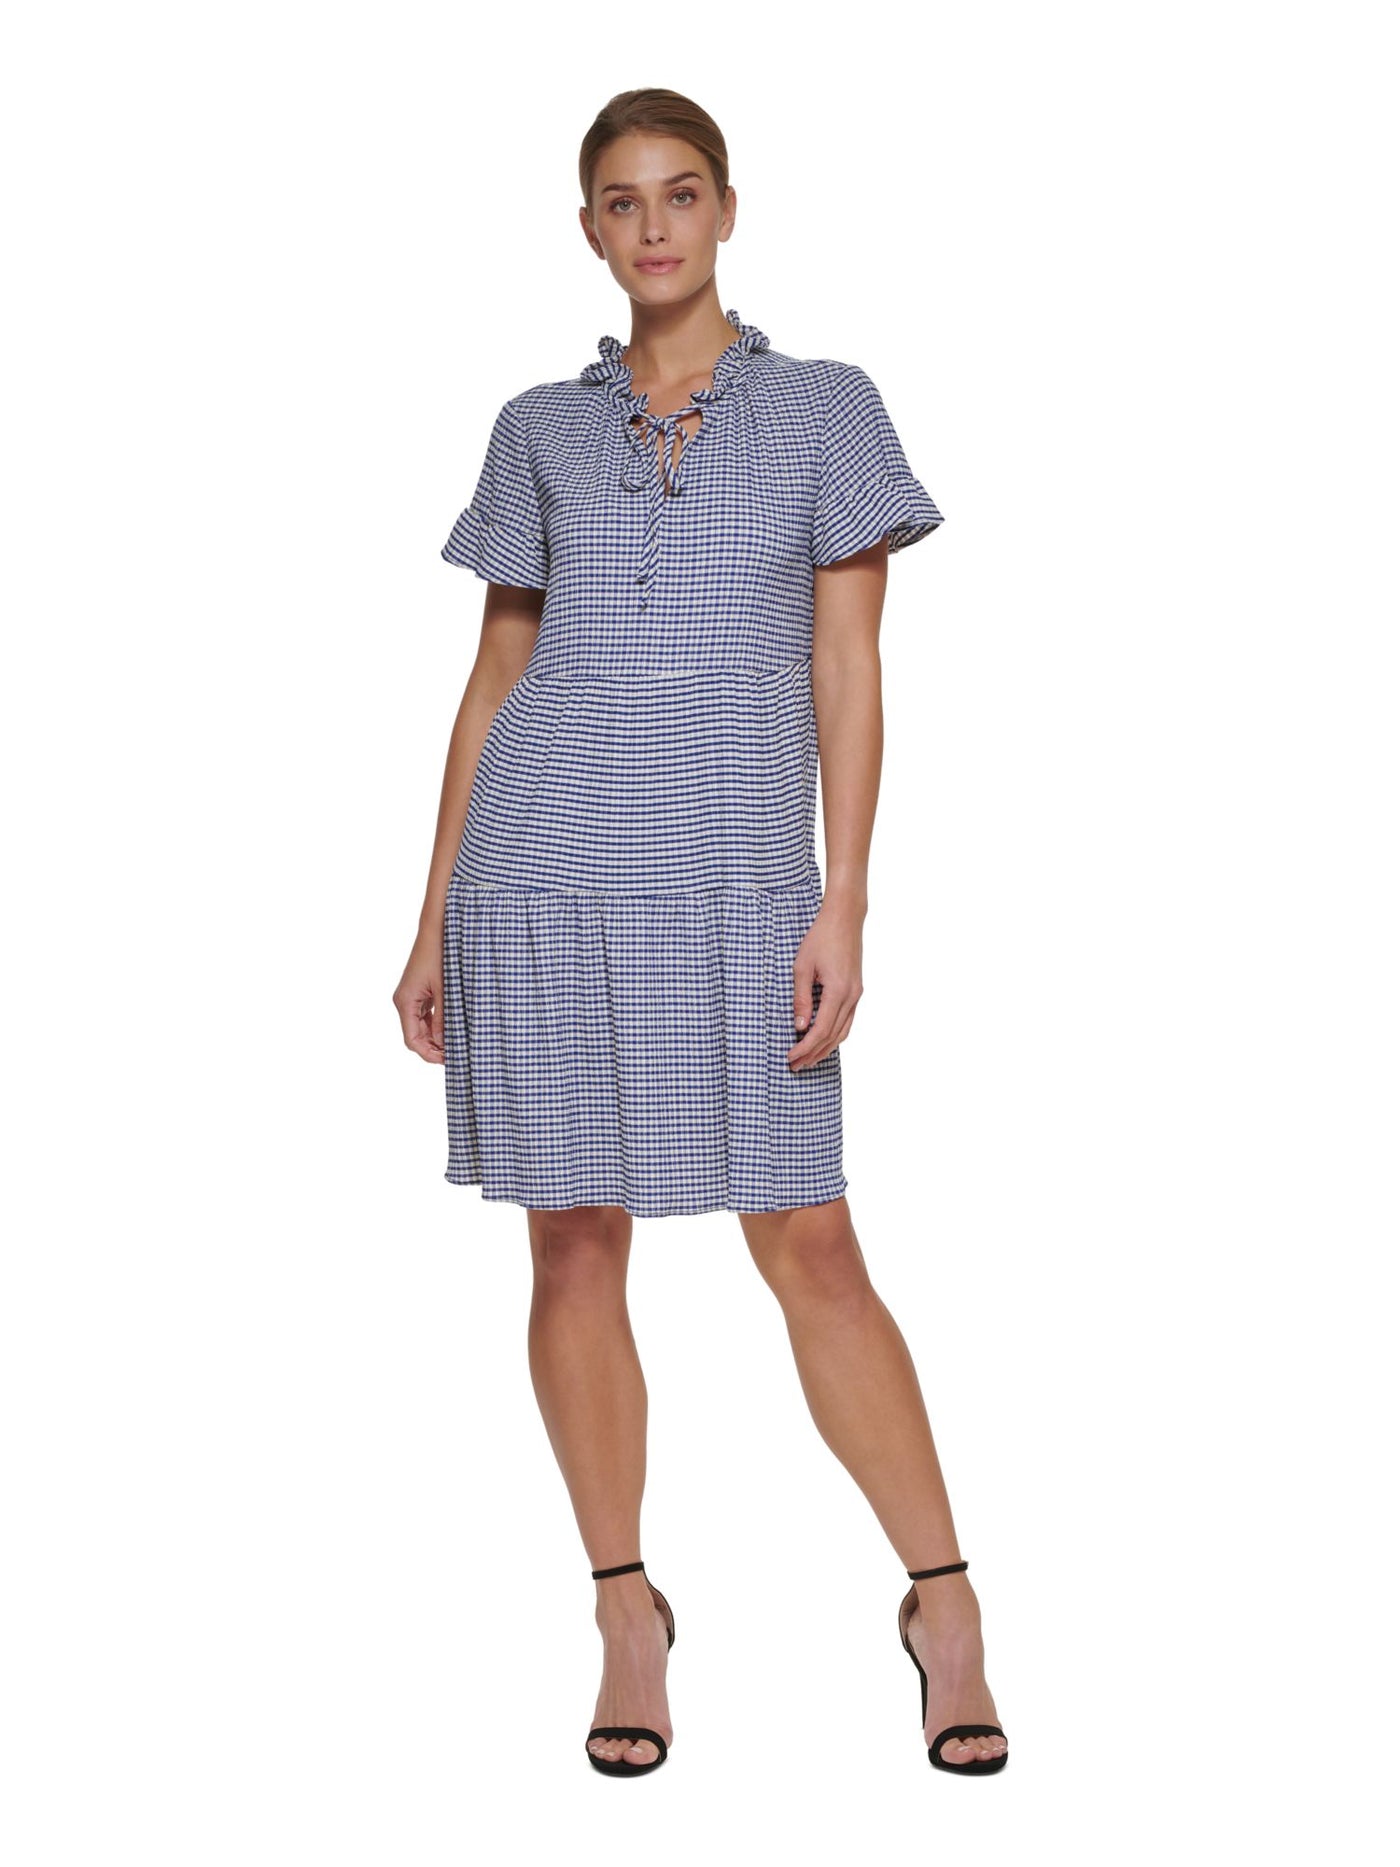 DKNY Womens Blue Ruffled Pullover Gingham Short Sleeve Tie Neck Above The Knee Wear To Work Sheath Dress 16